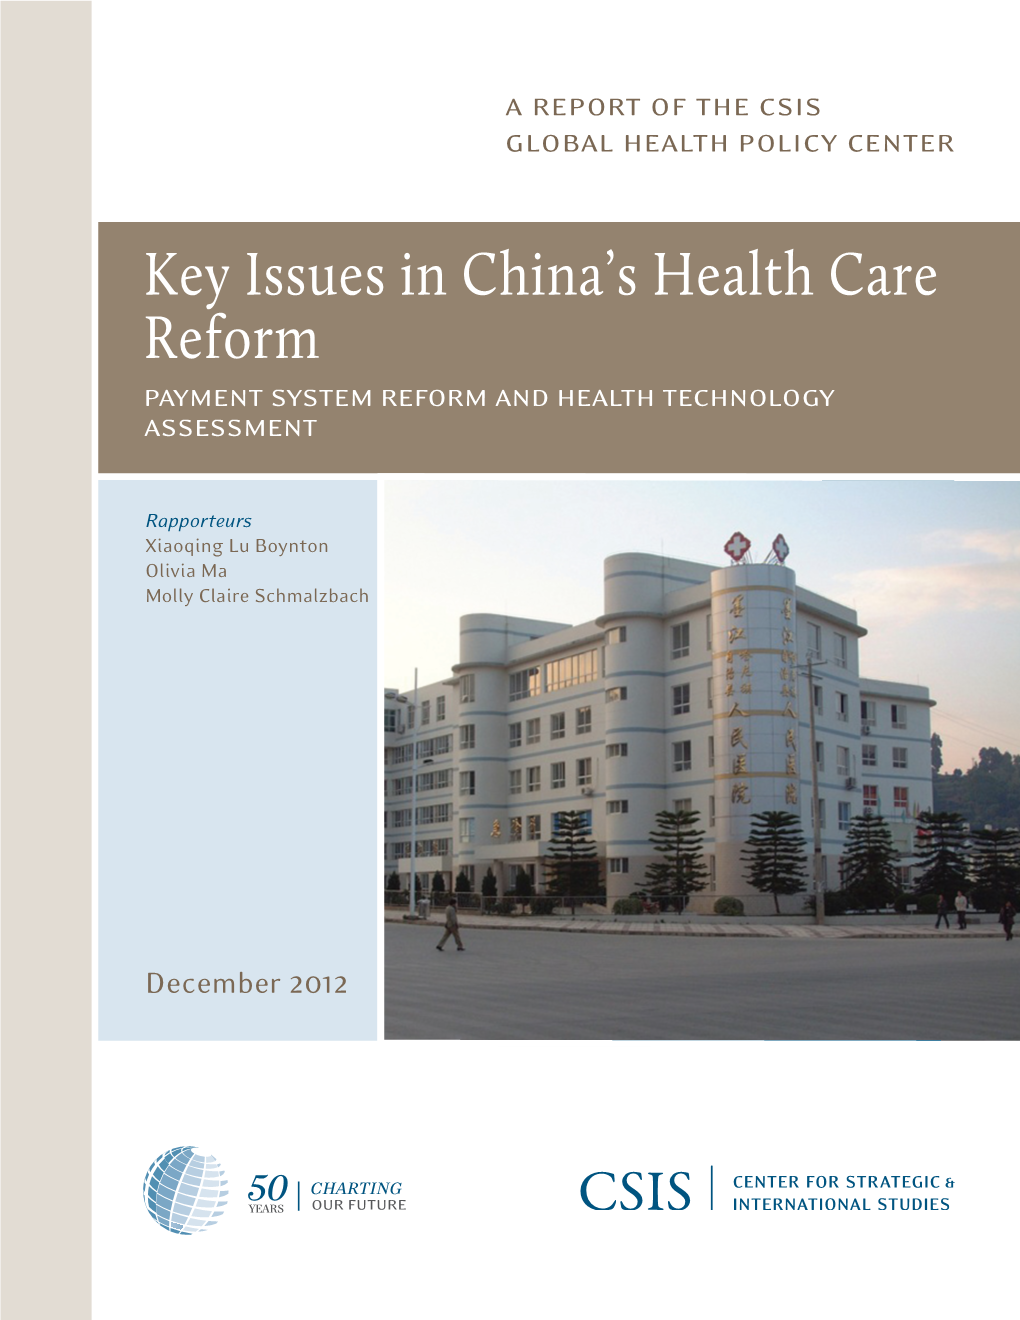 Key Issues in China's Health Care Reform